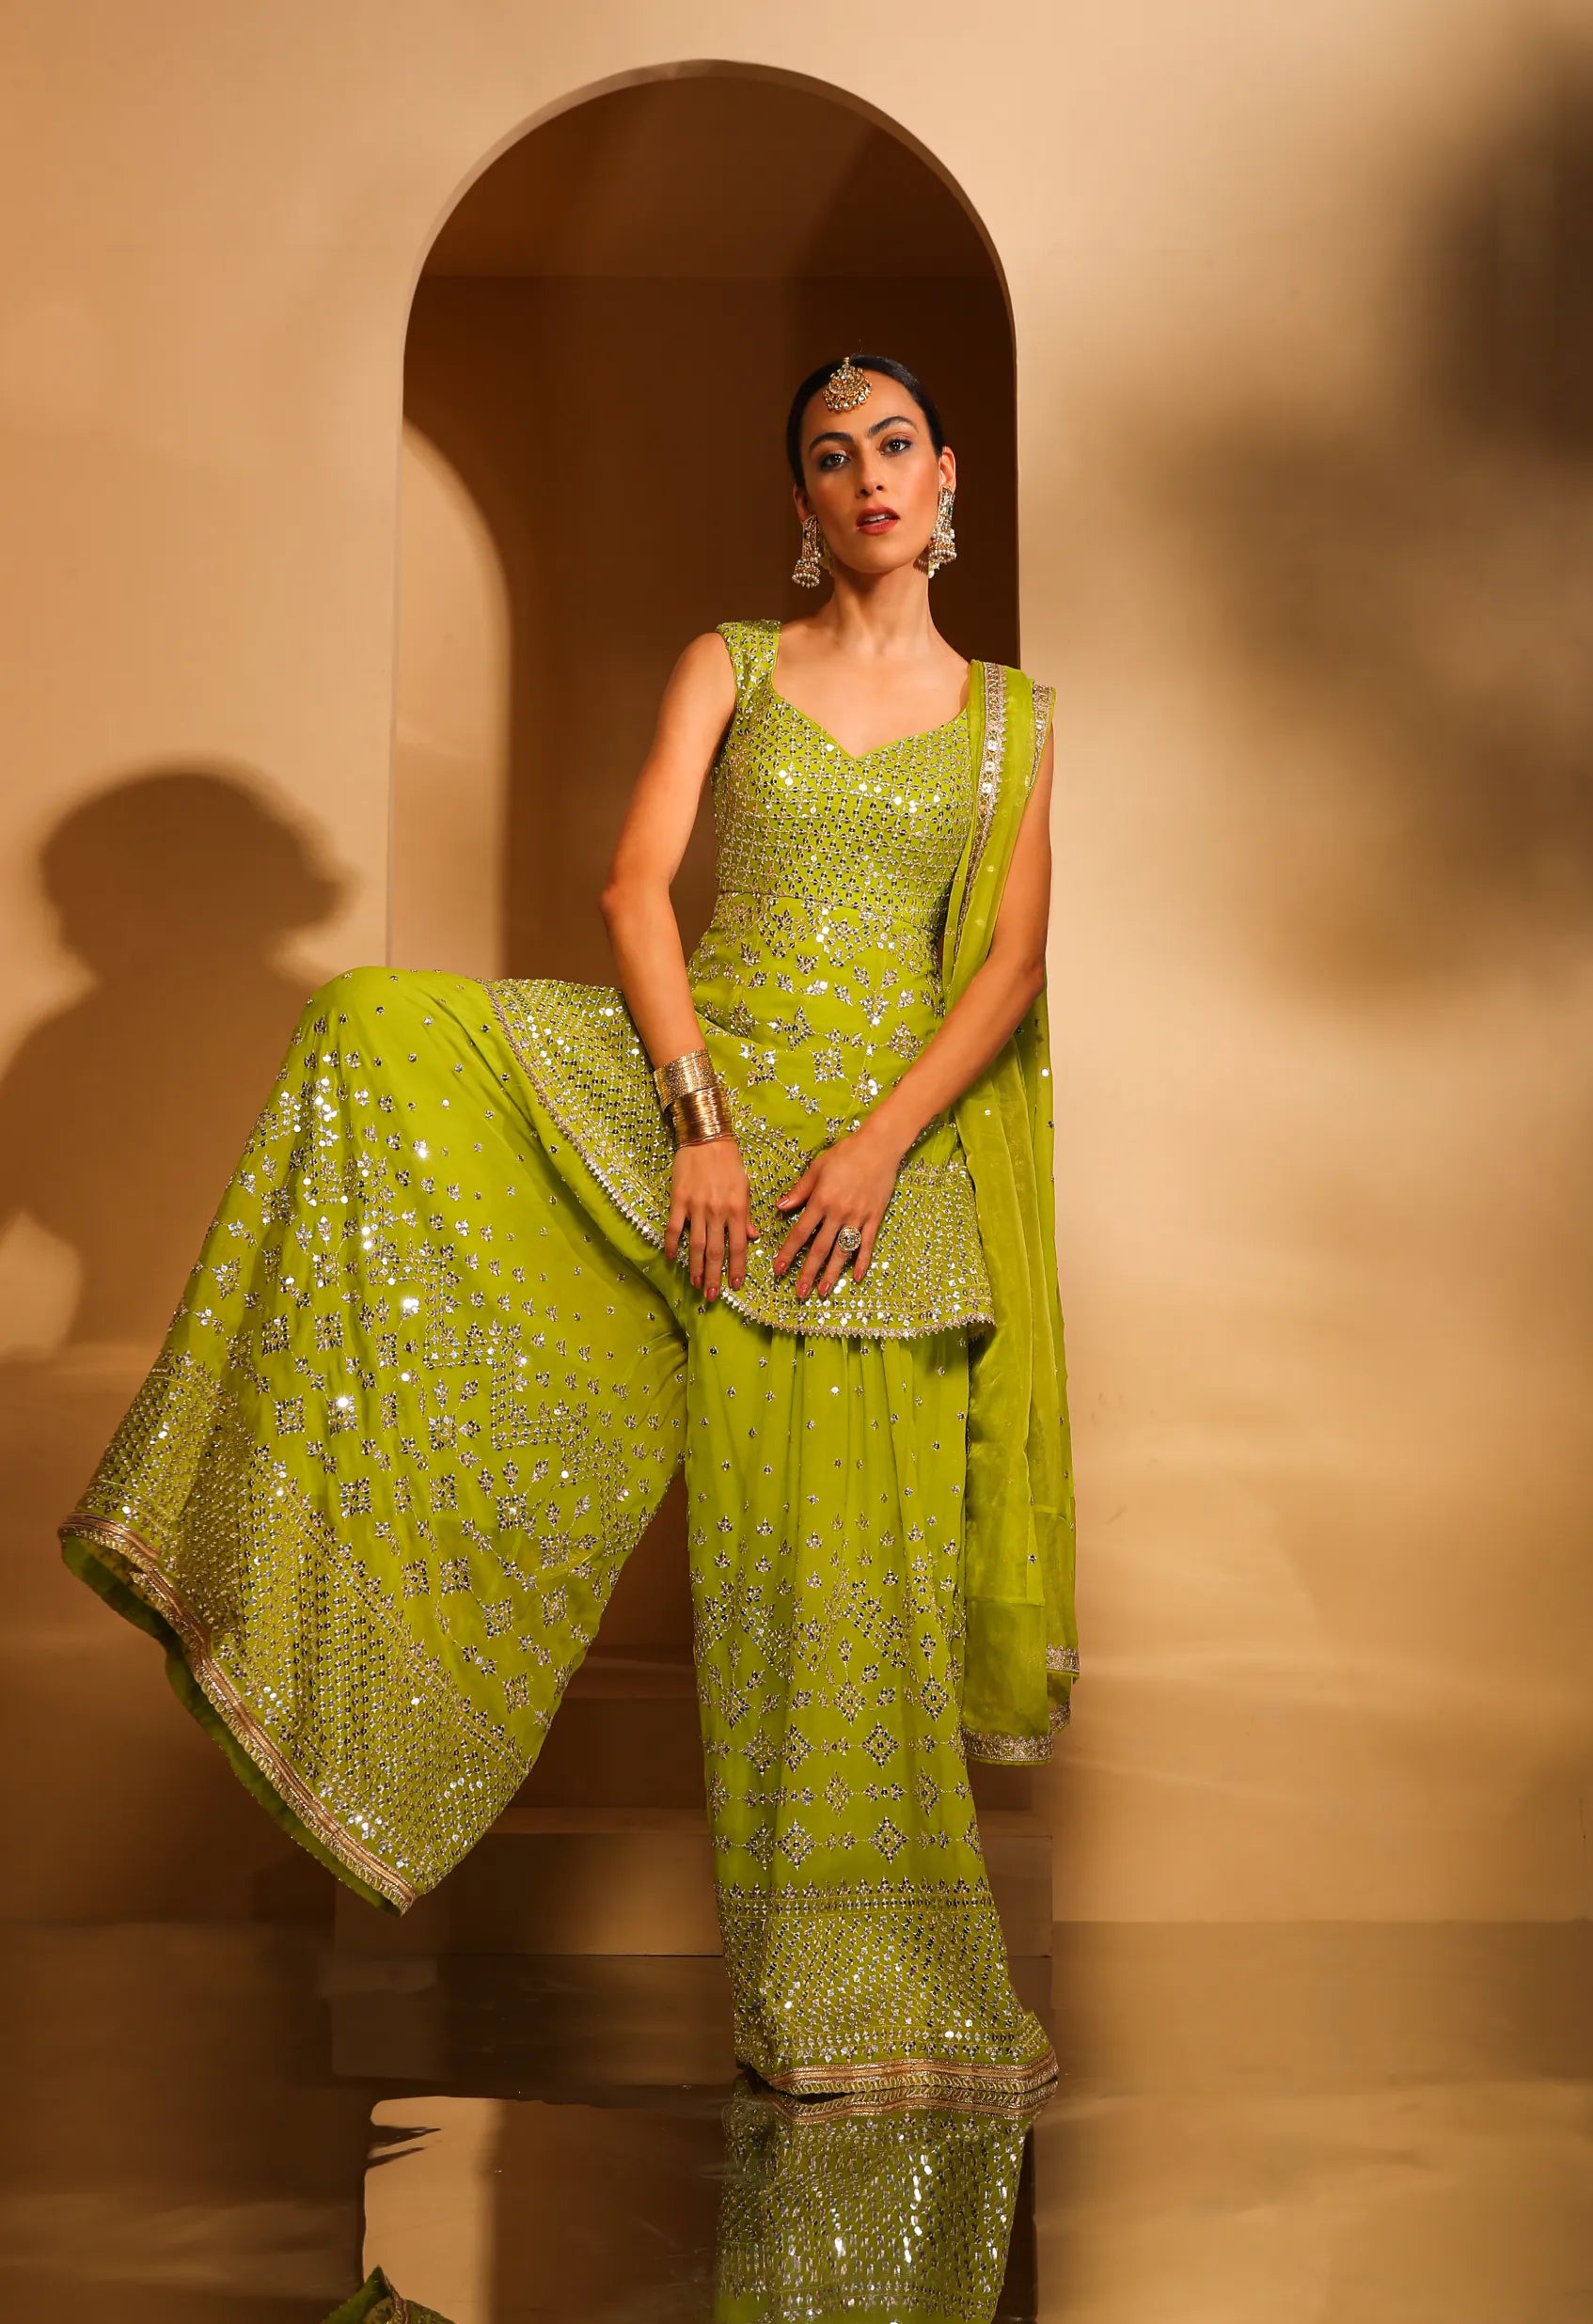 Embrace beauty: The timeless appeal of Sharara dresses for weddings